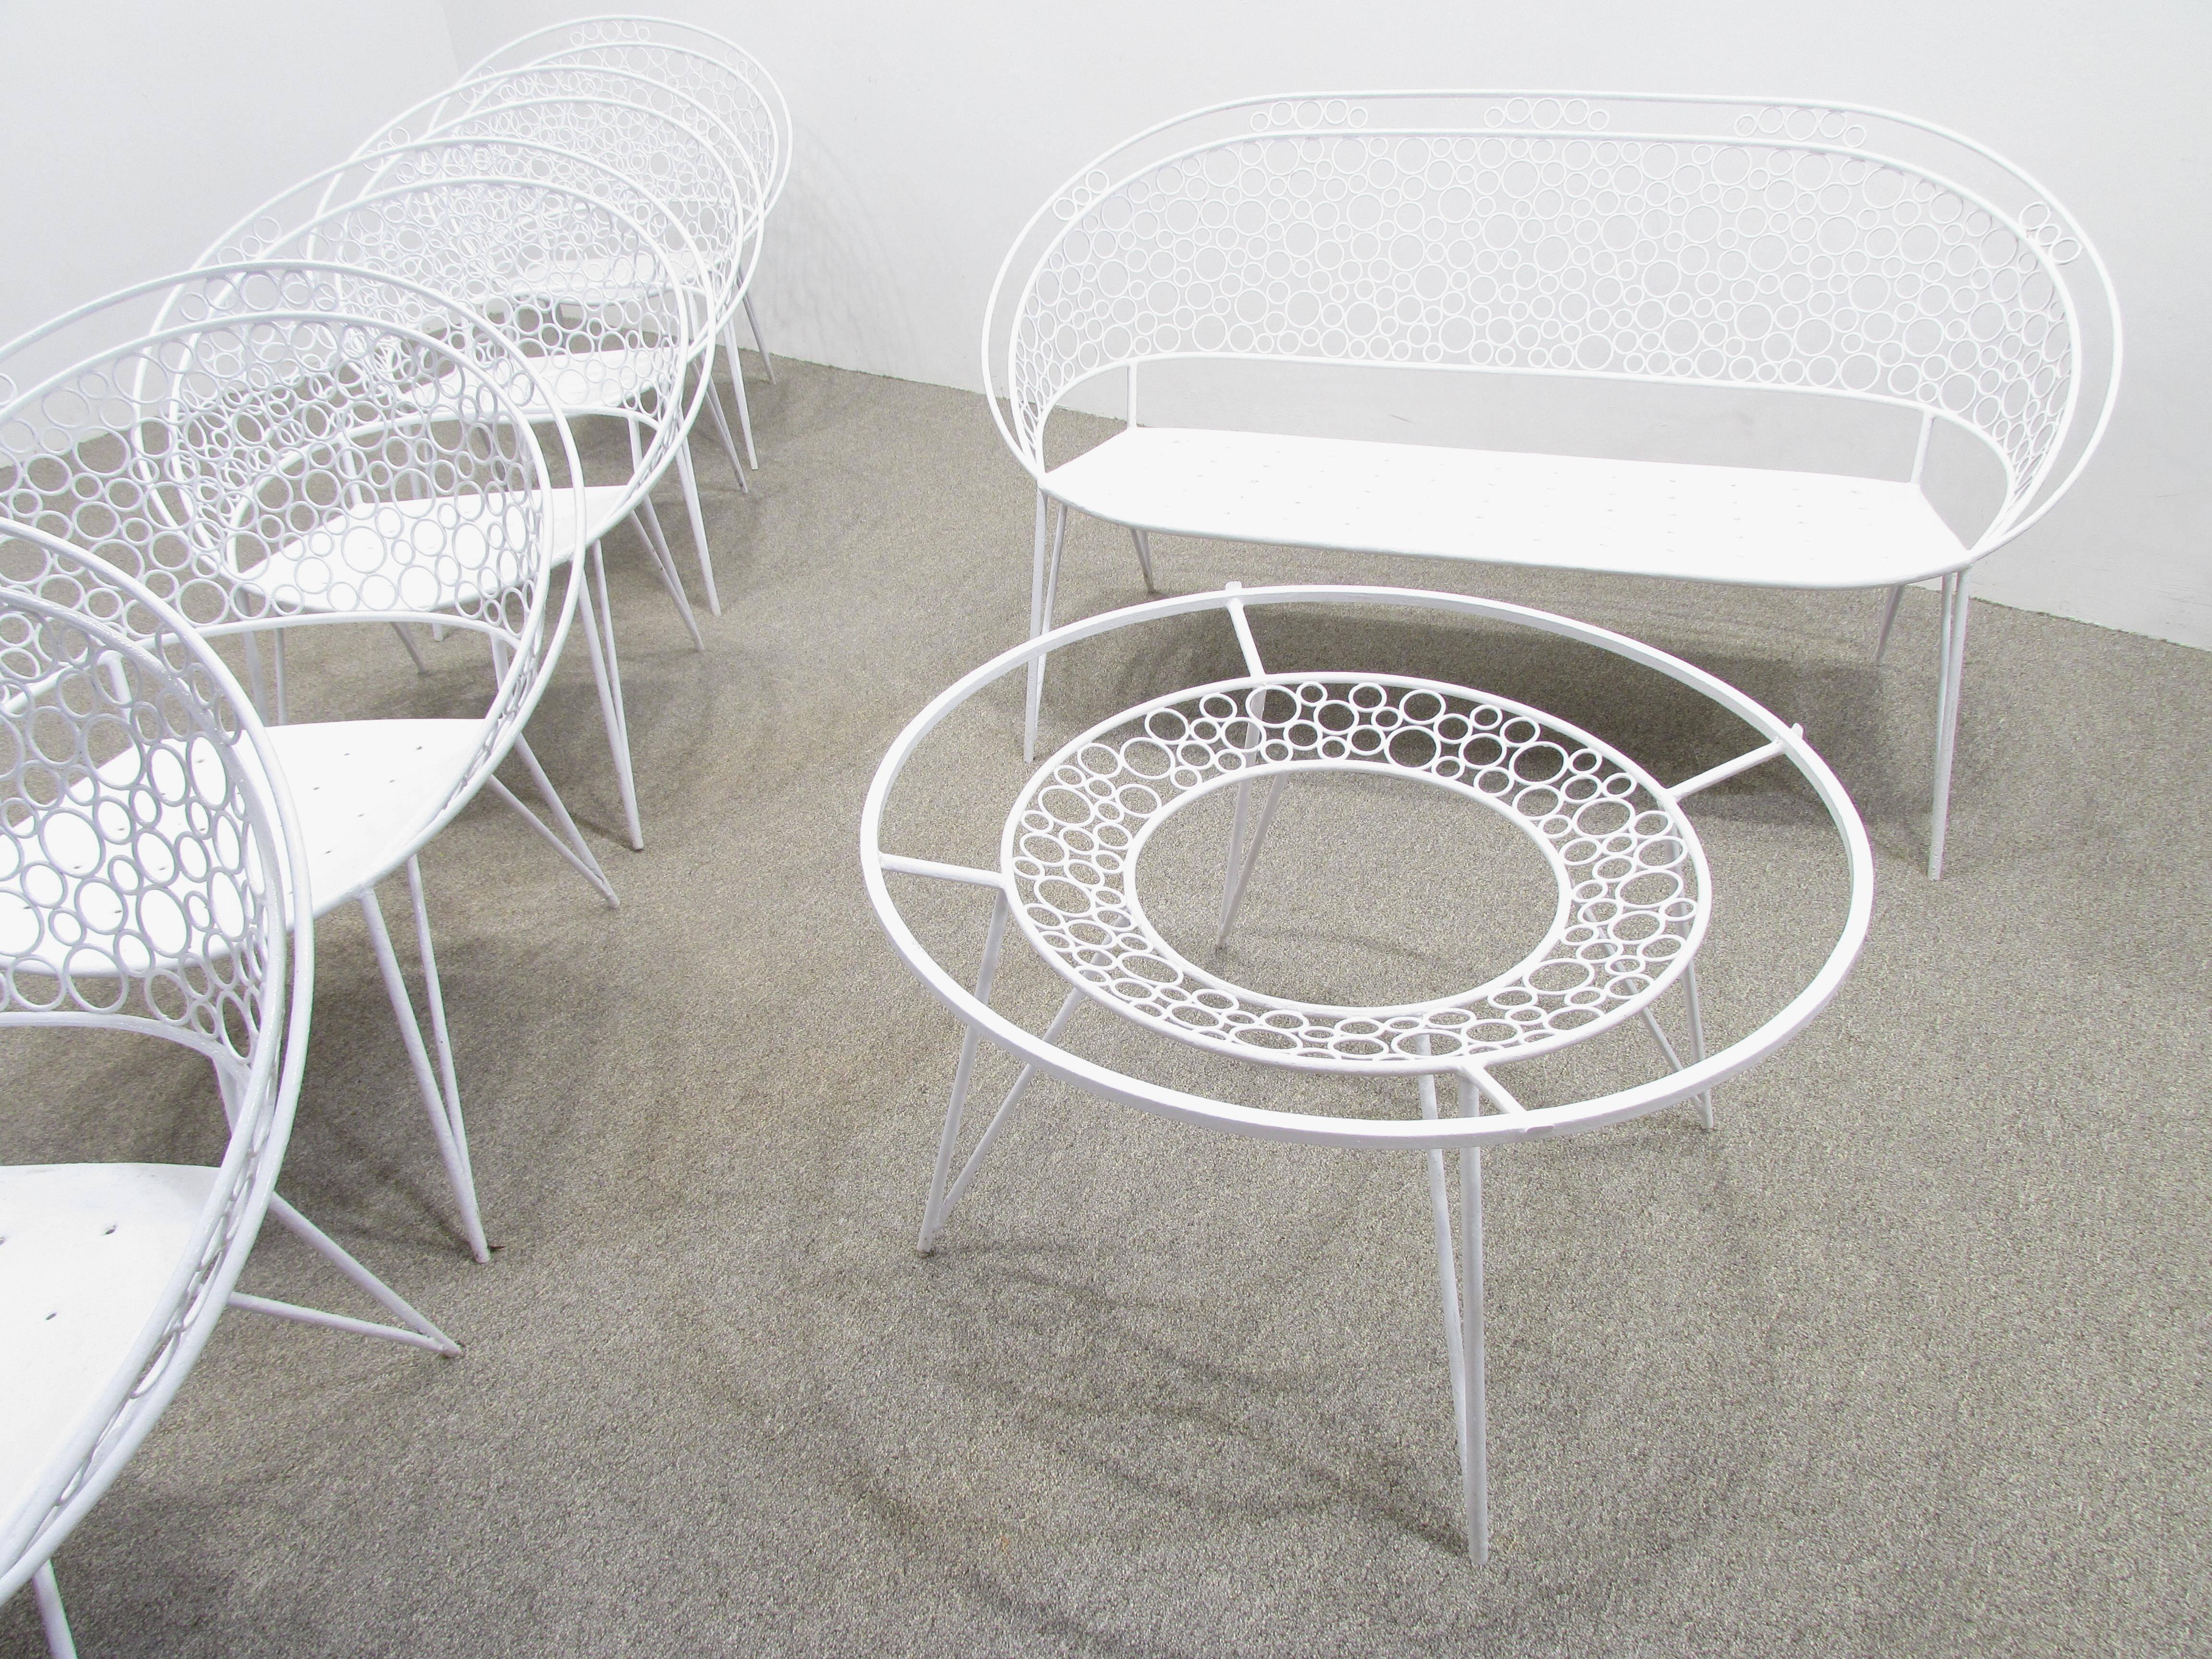 White painted garden set consisting of six hoop design chairs a settee and a cocktail table each filled with circles amazing handwork on this set.